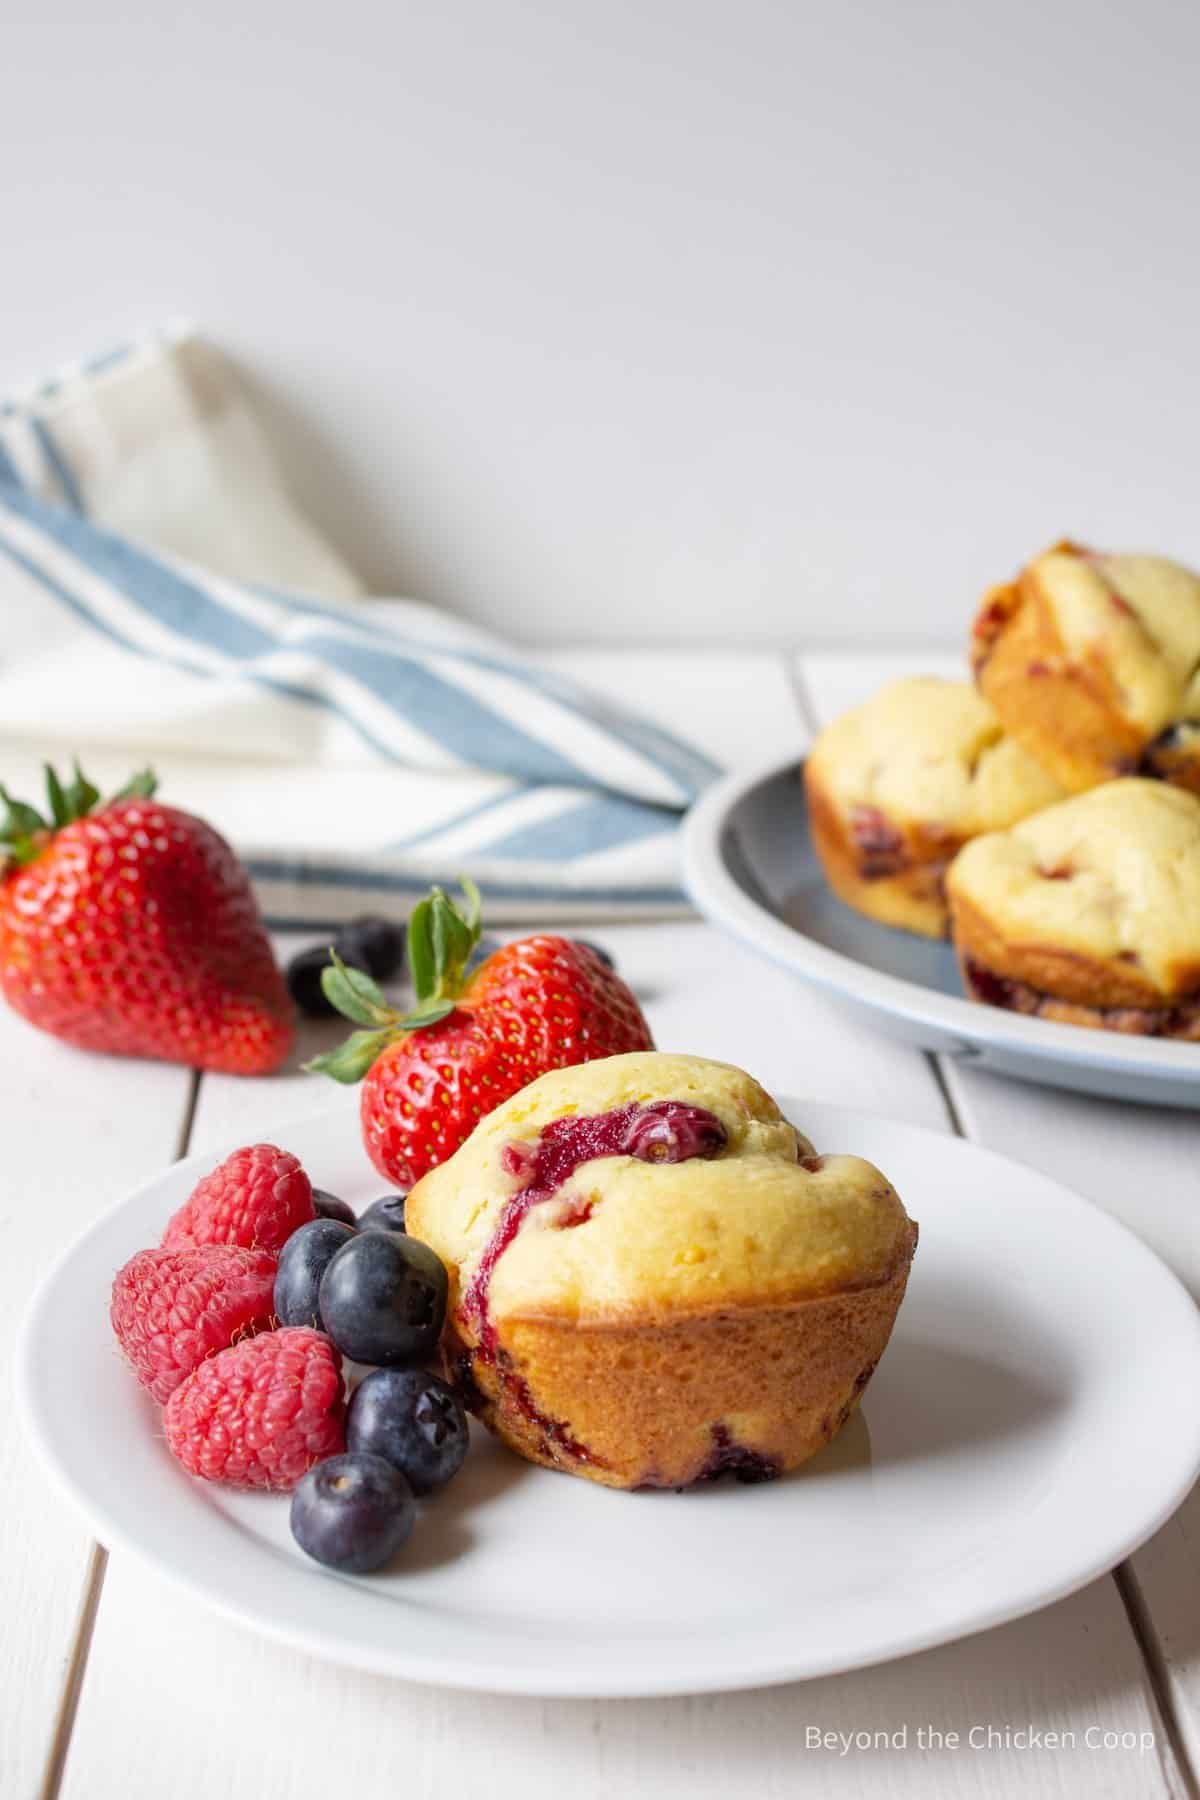 A berry muffin with fresh berries.